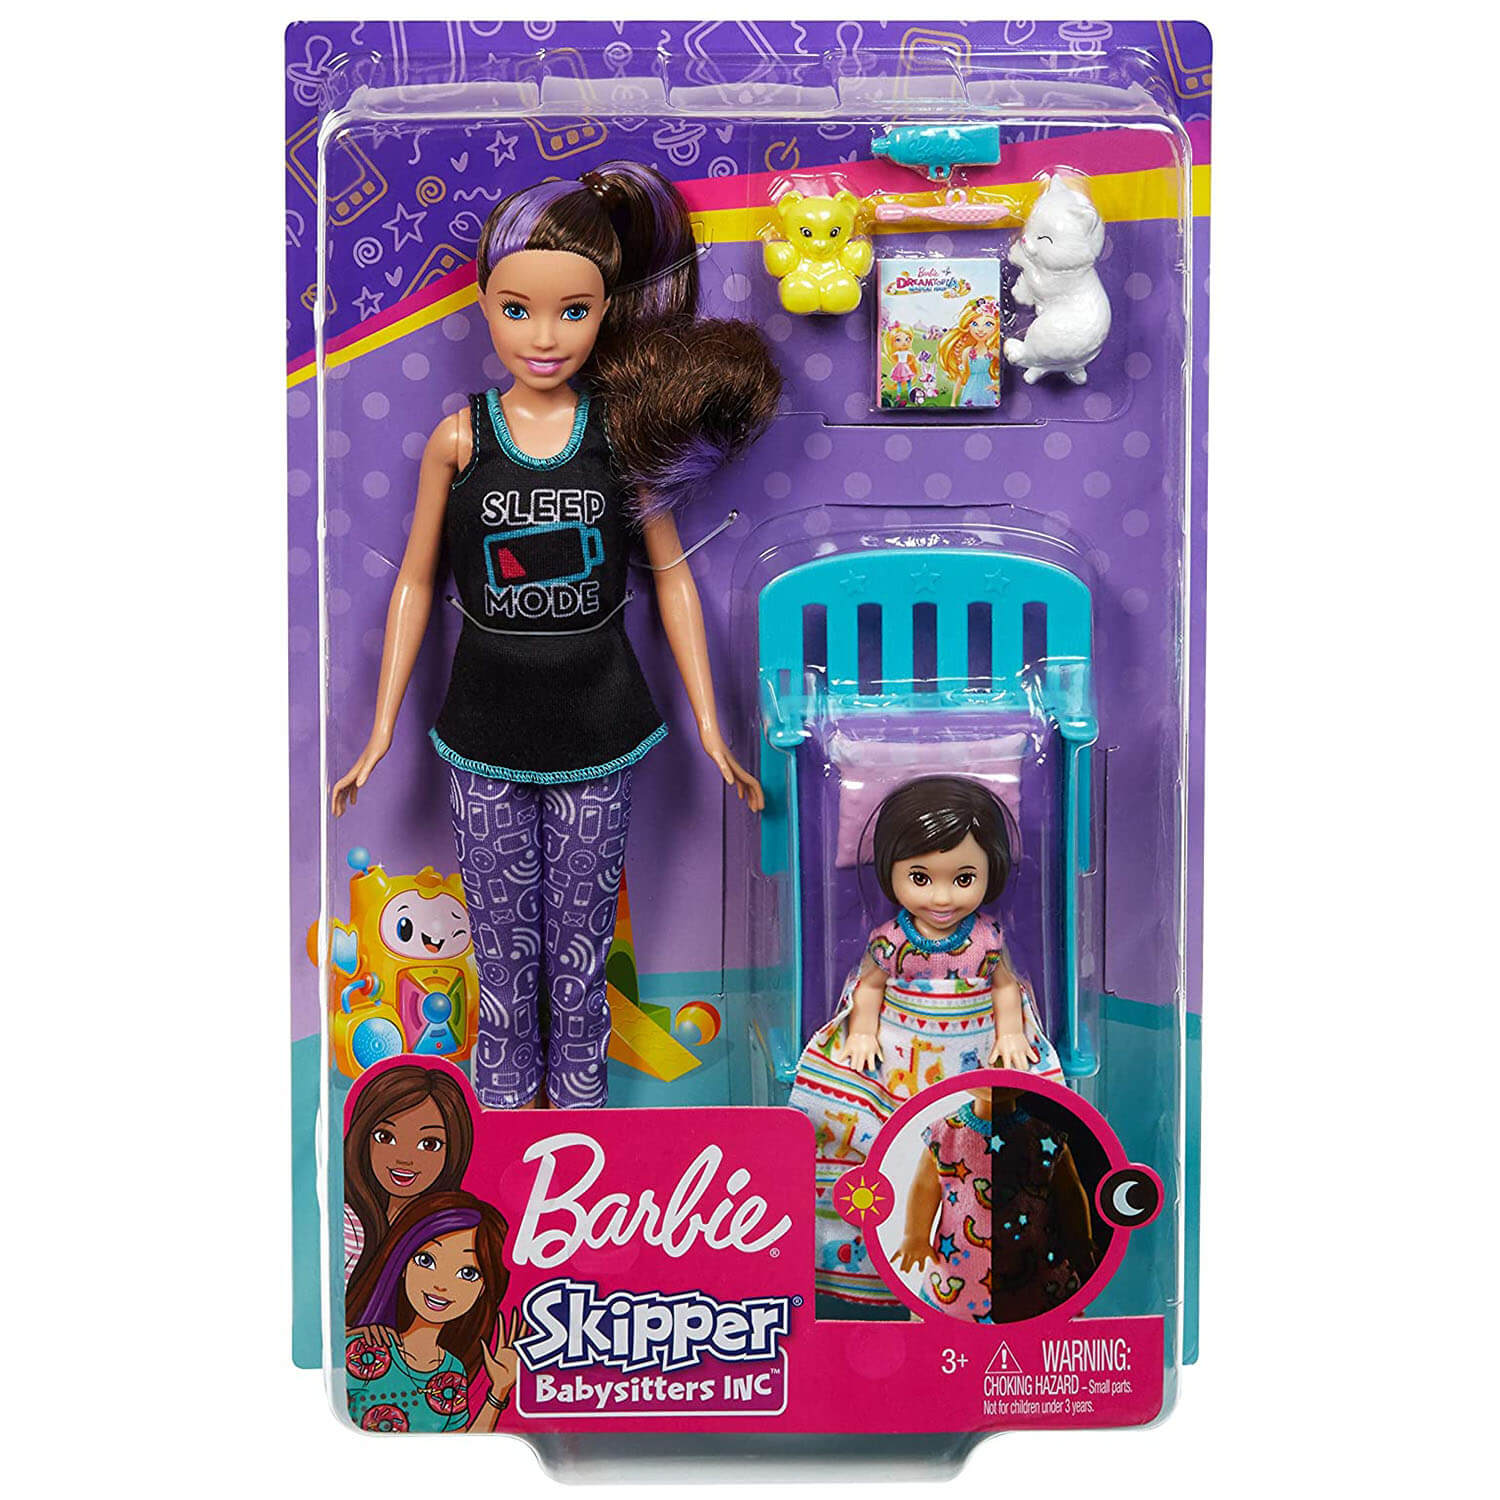 Front view of the Barbie Skipper Babaysitter INC Doll Bedtime Playset package.